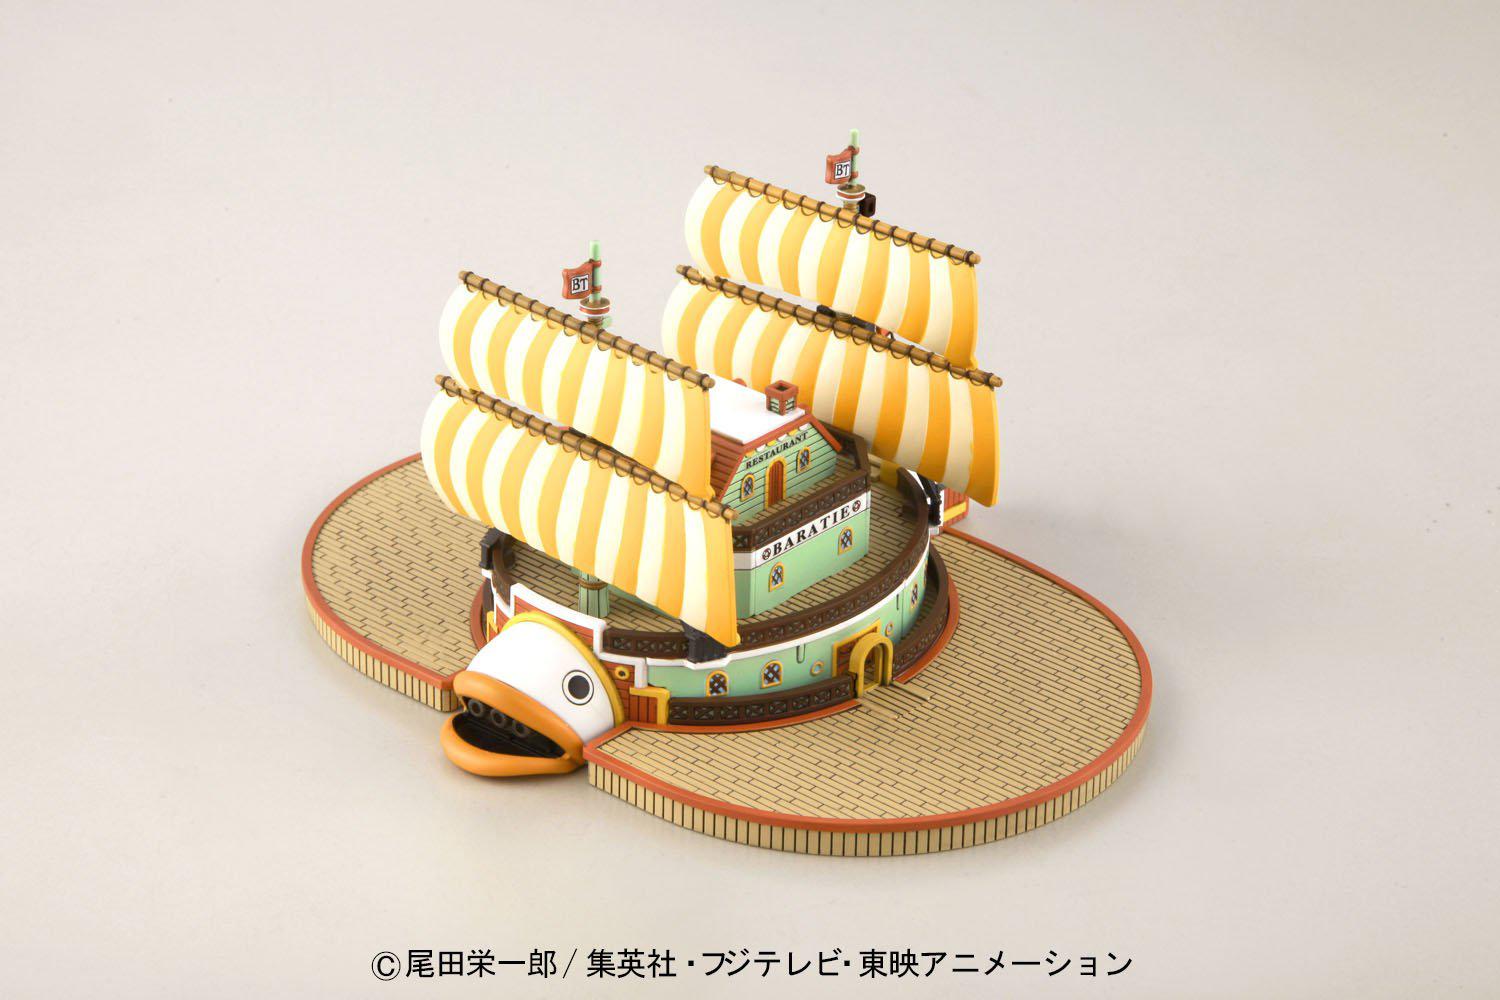 Preview: Baratie -  Grand Ship Collection Vol. 10 - One Piece Model Kit